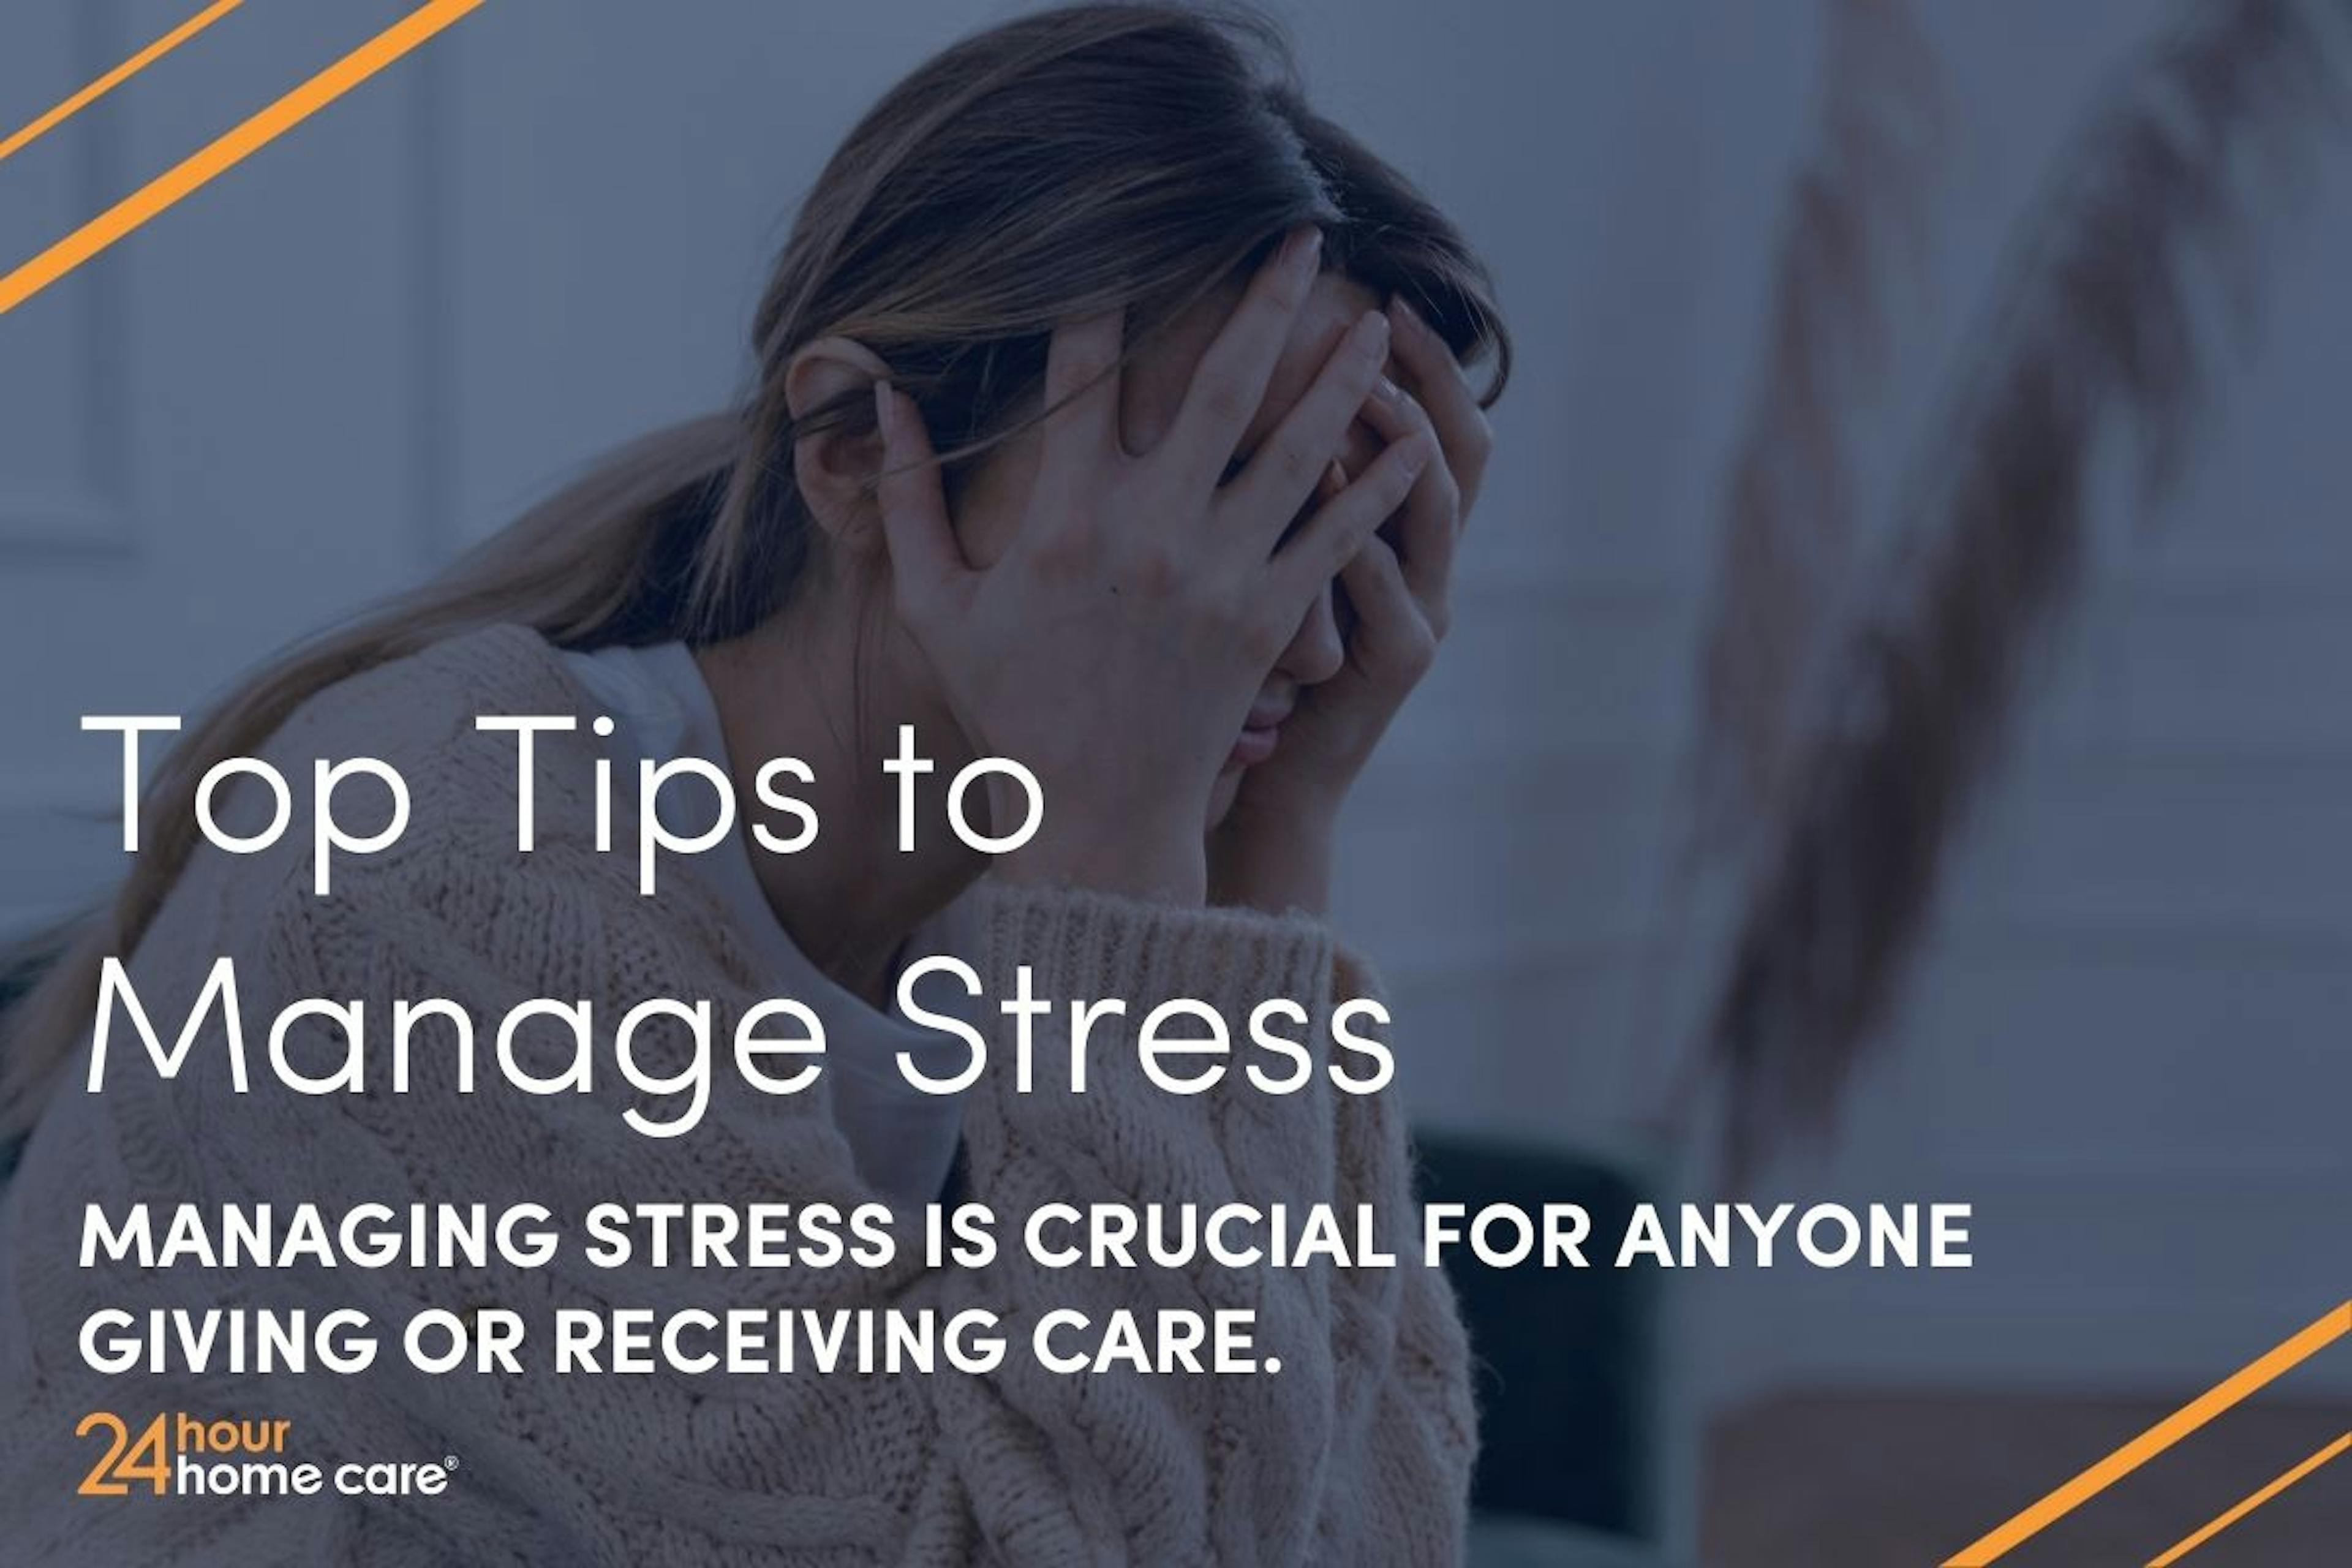 A stressed woman puts her head in her hands, cover image for the blog "Top Tips to Manage Stress."